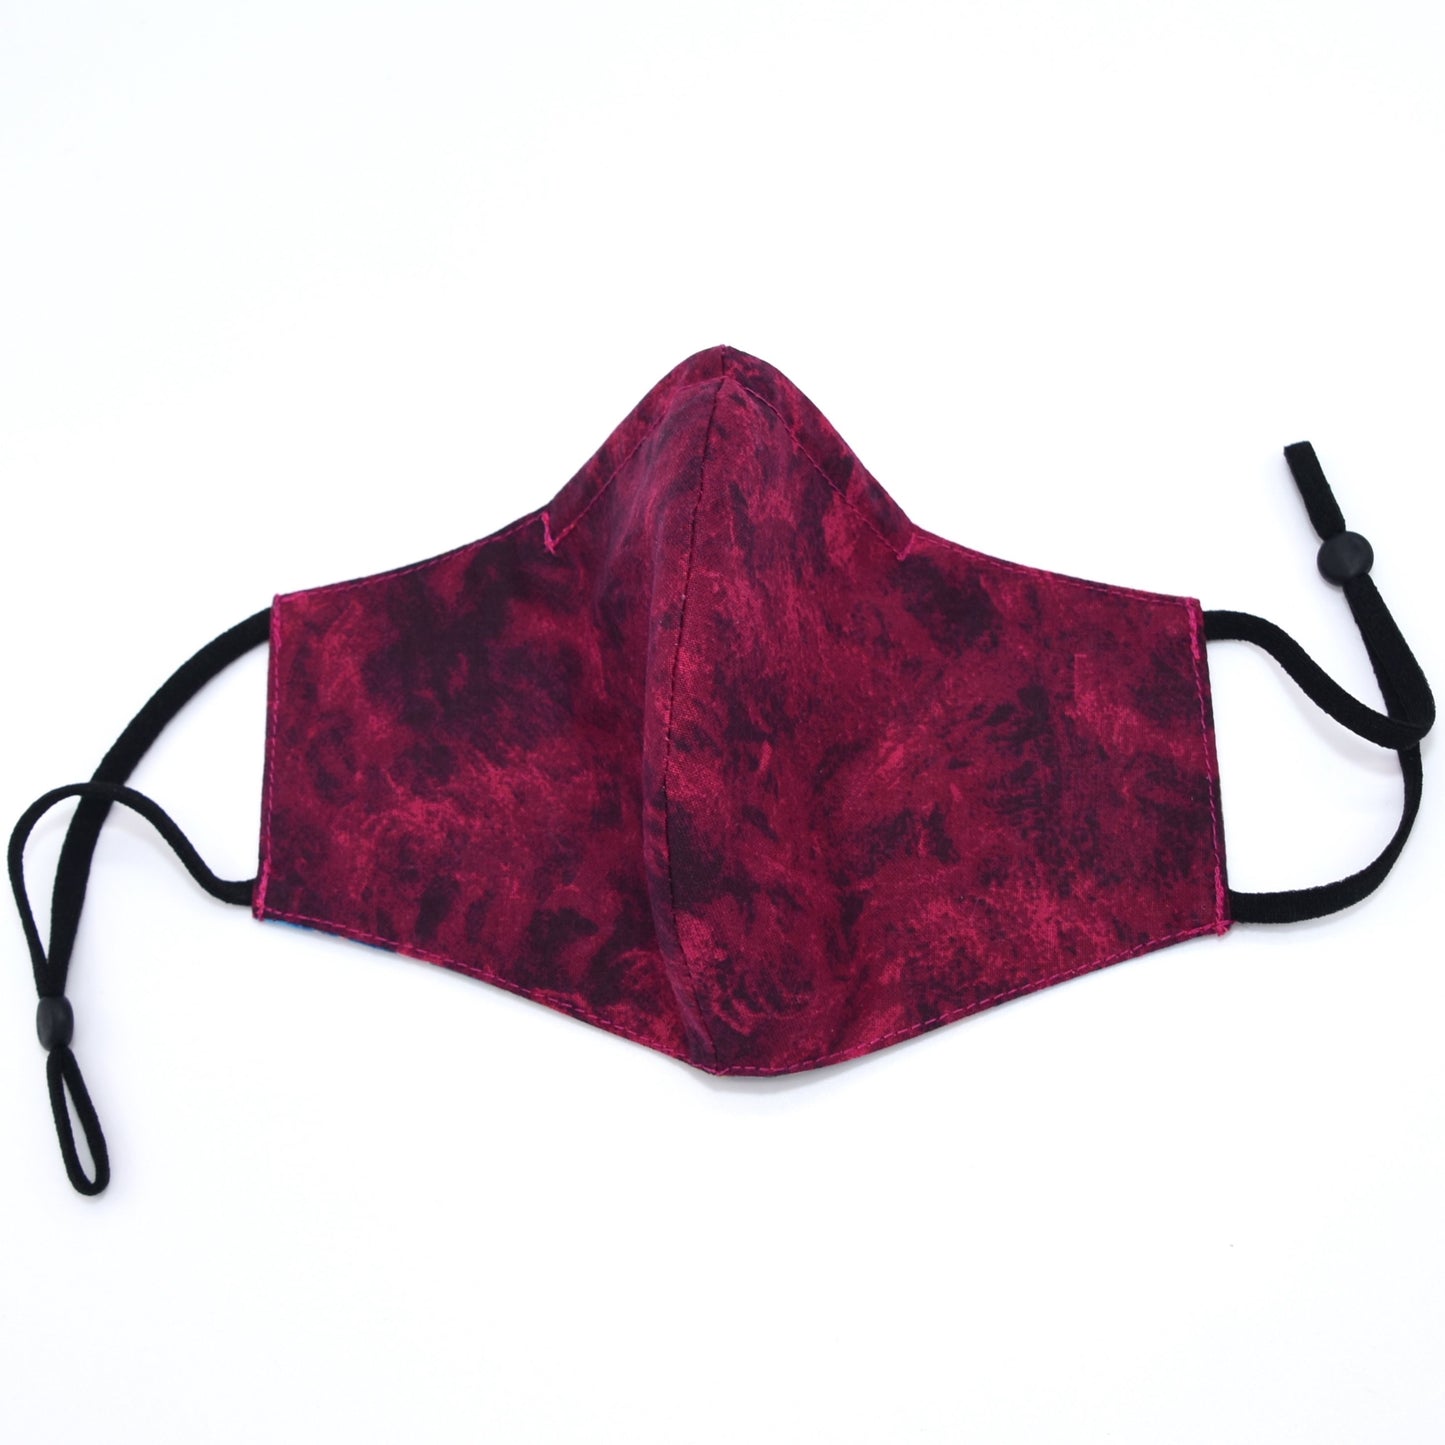 Tie-dye Flowers Print and Burgundy Watercolor Reversible Face Mask